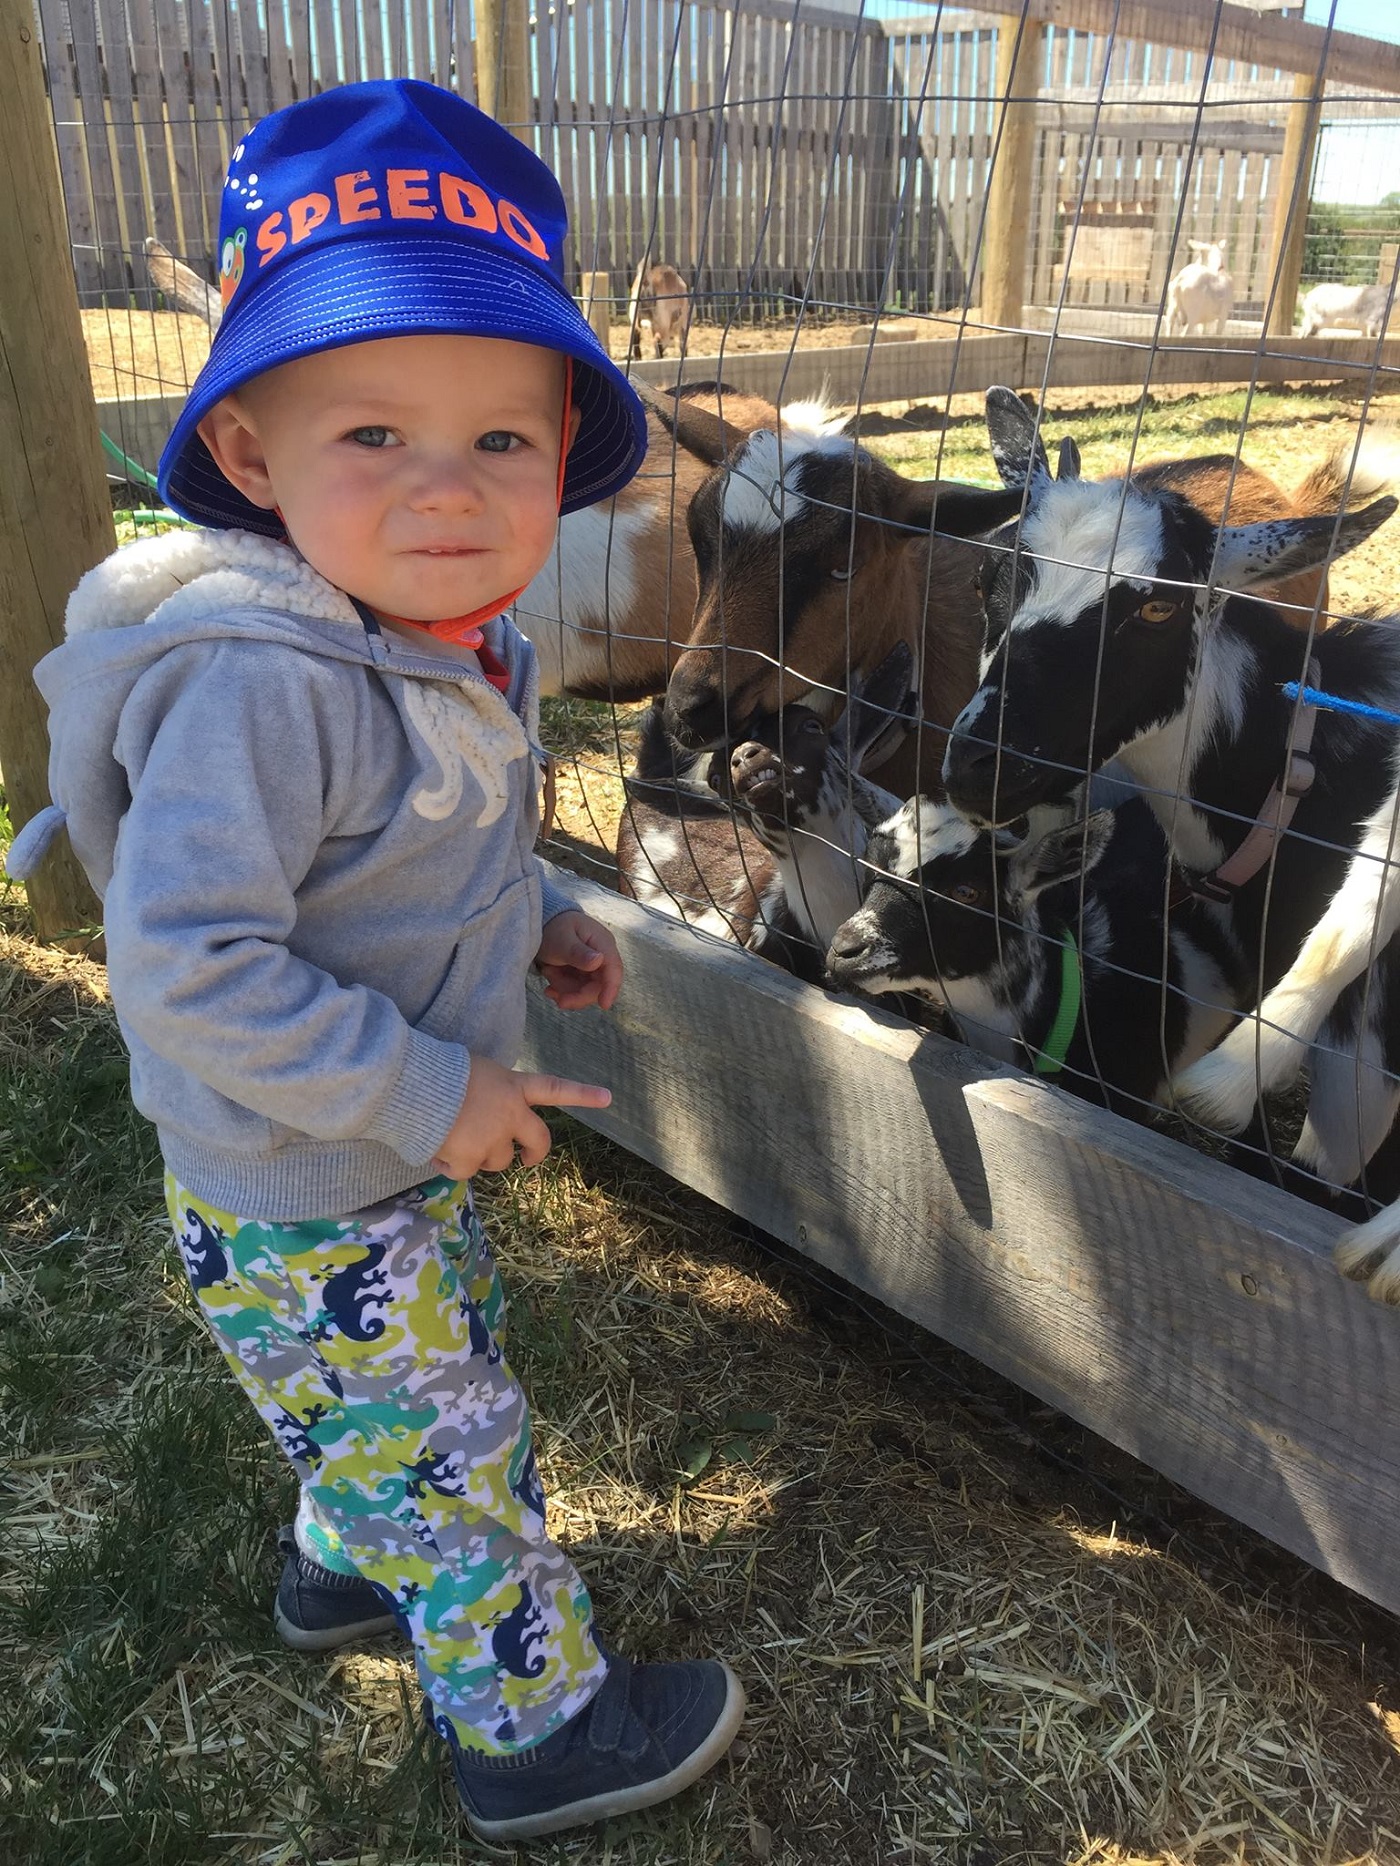 Checking out the goats